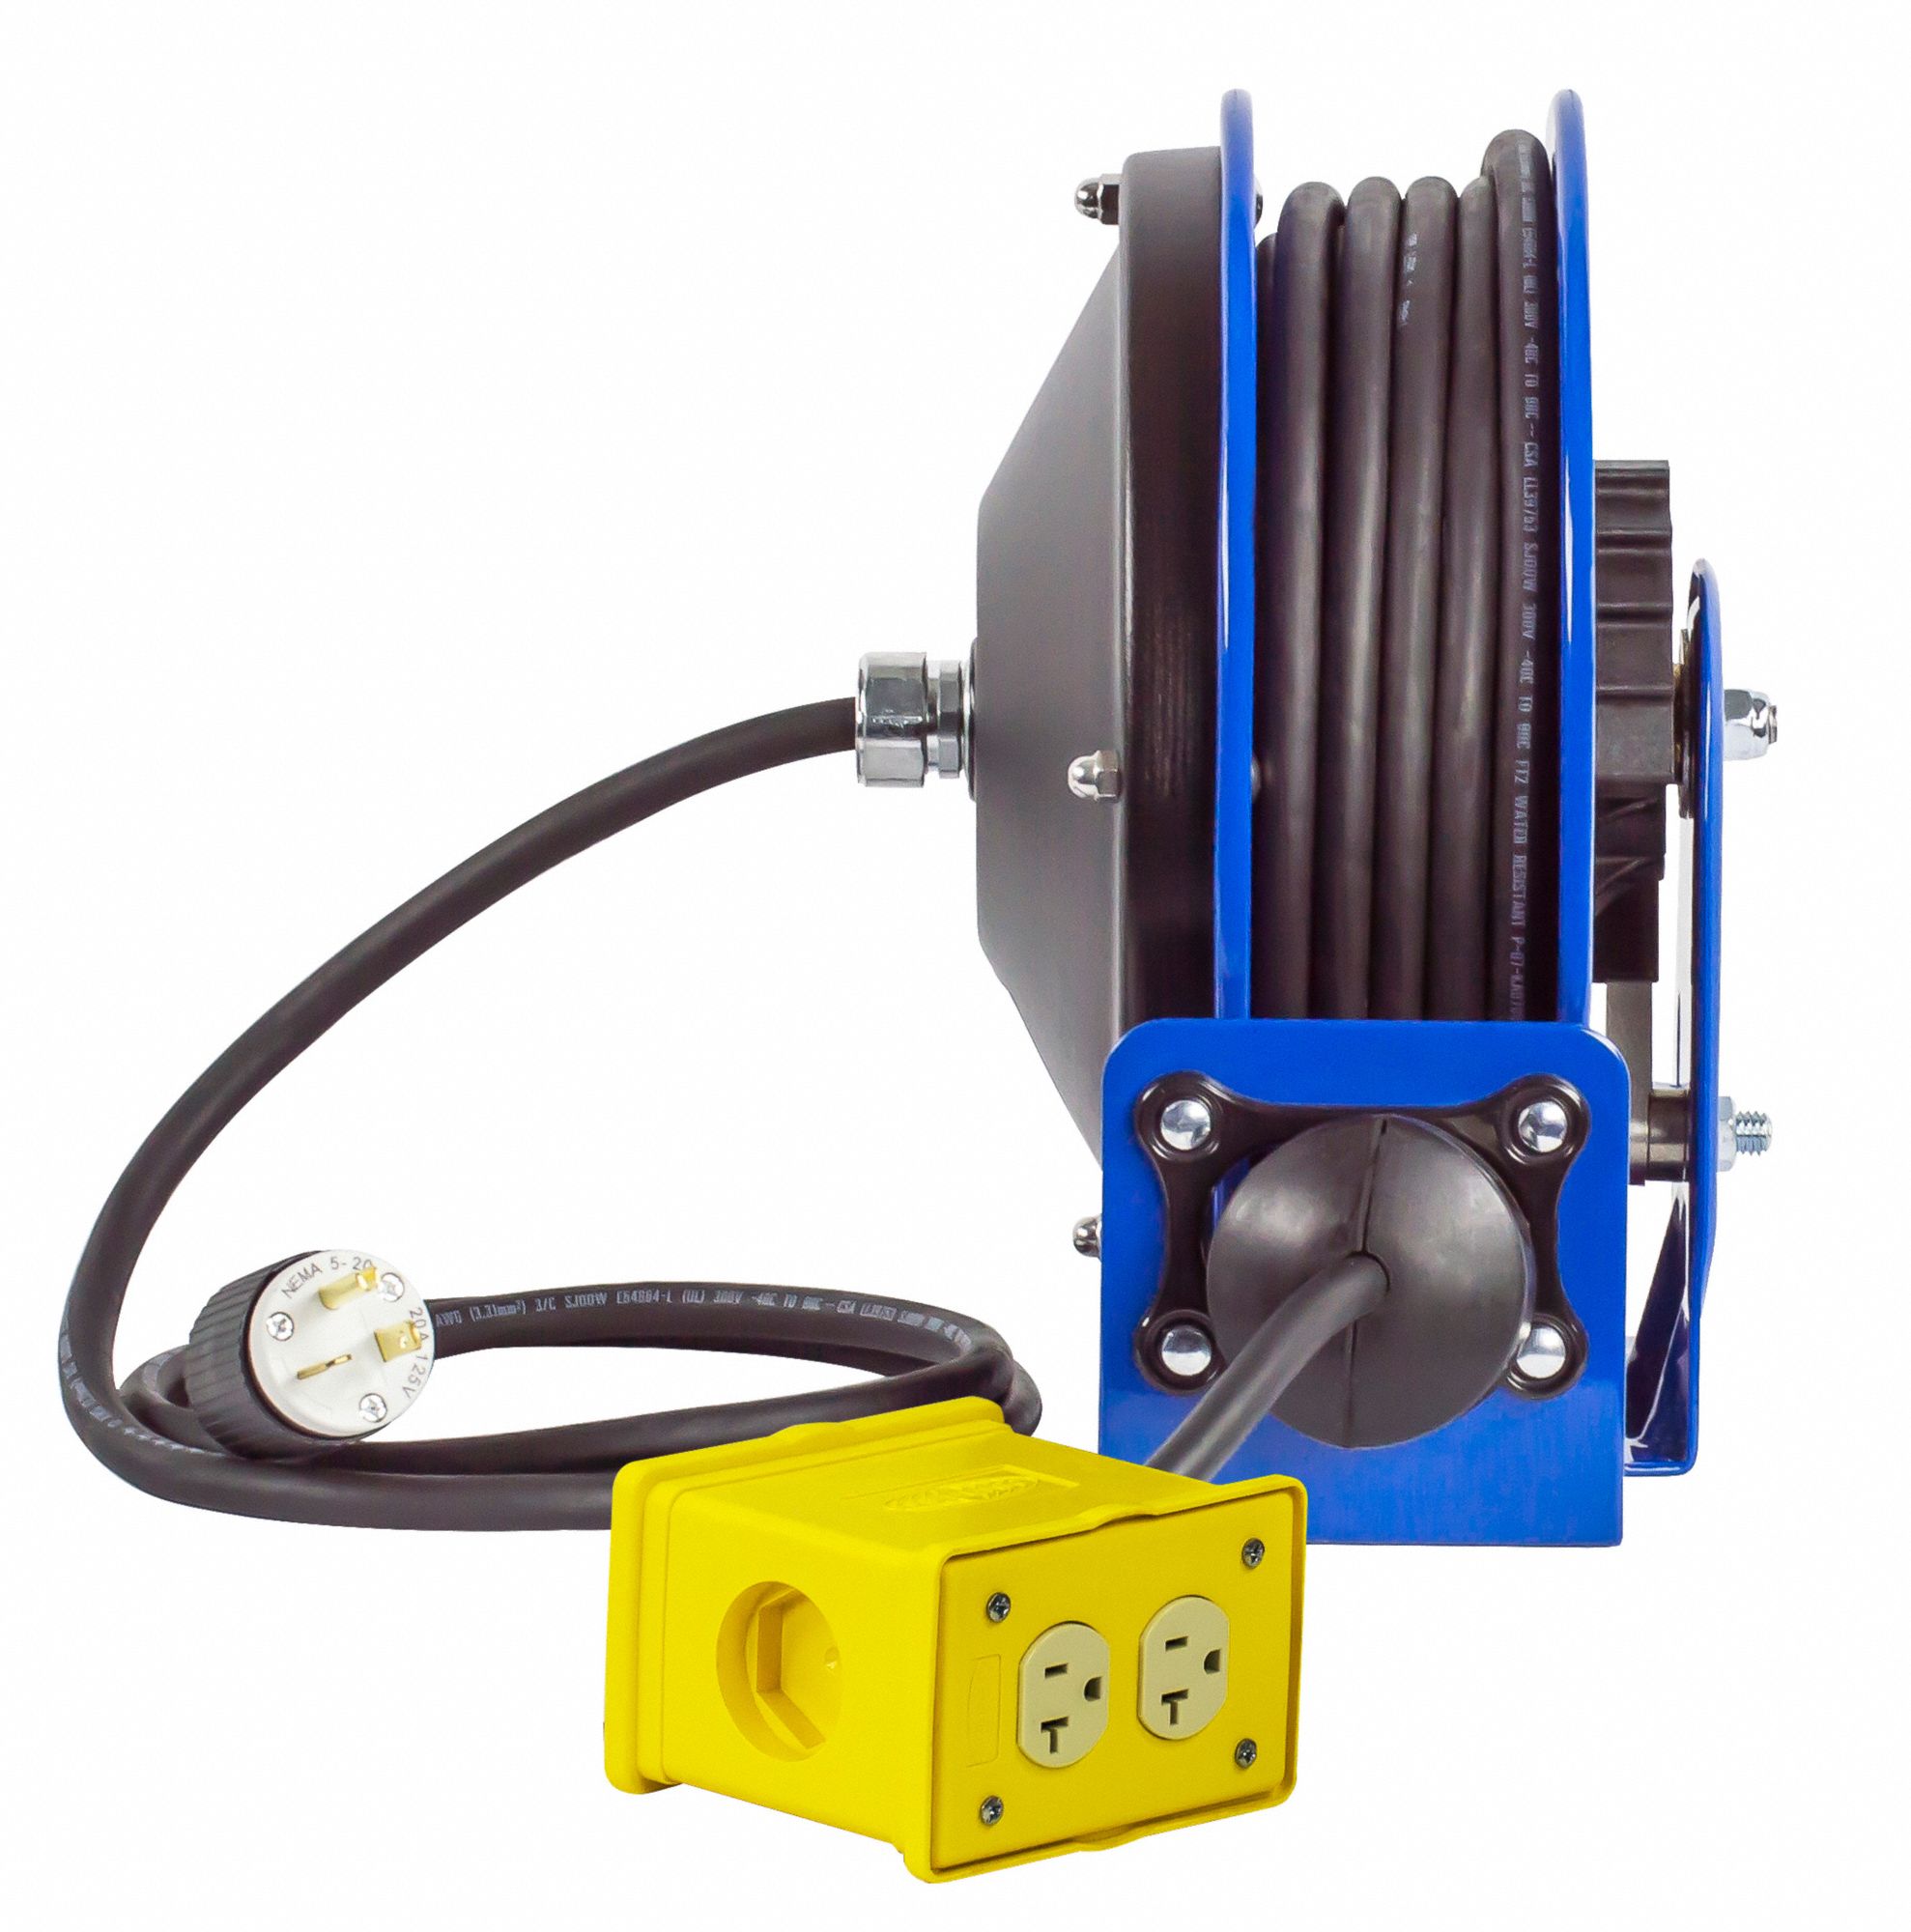 Coxreels PC10-3012-F Compact efficient heavy duty power cord reel with a duplex G.F.C.I metal industrial receptacle